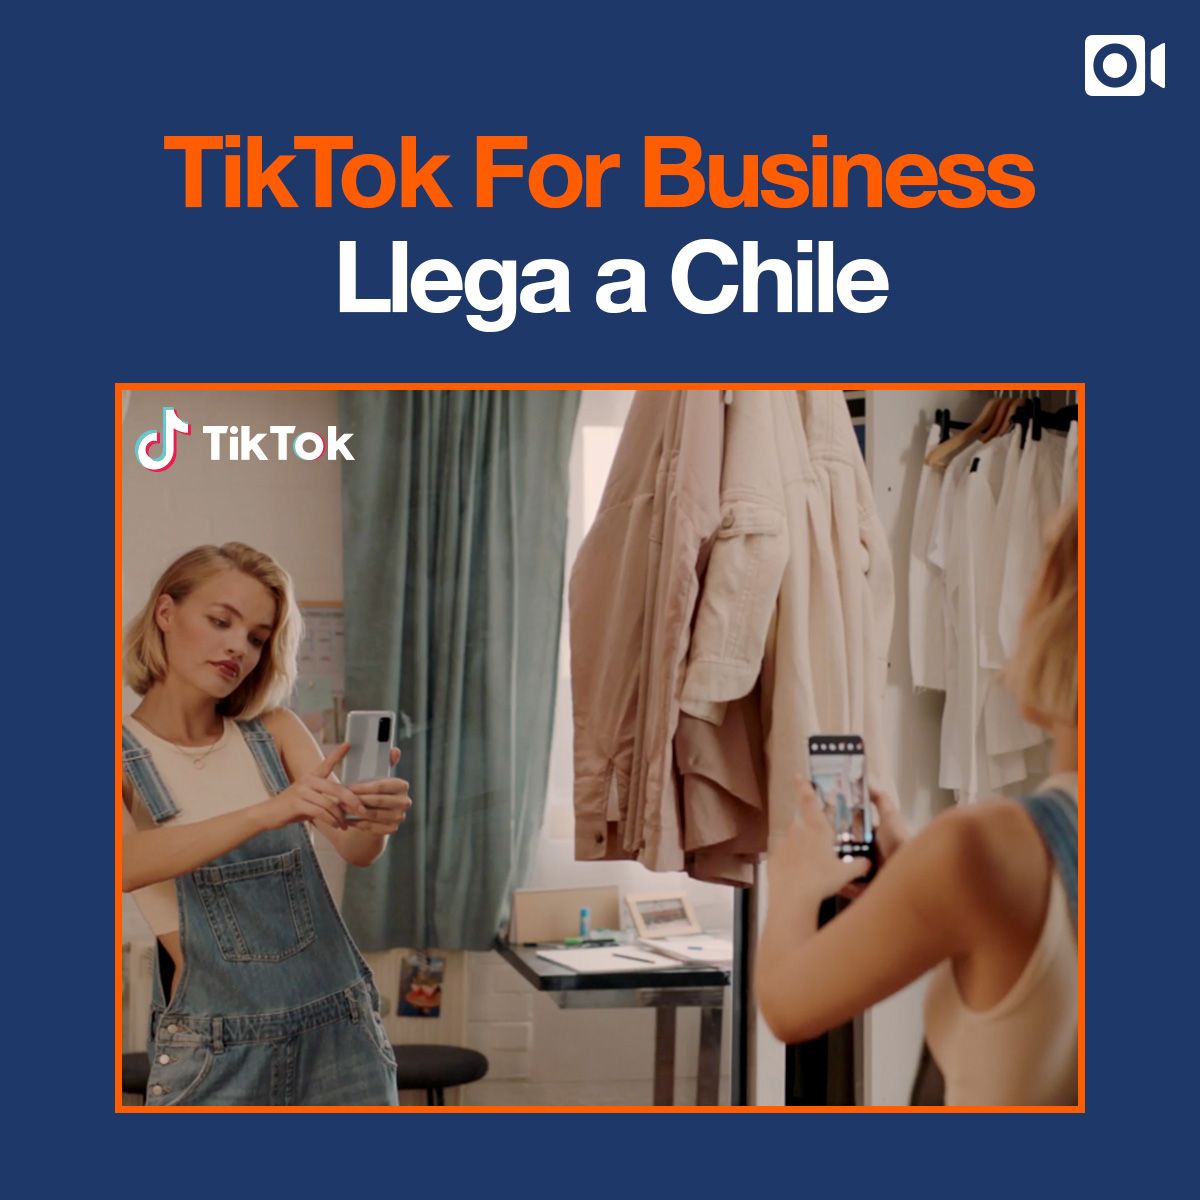 TikTok For Business Llega a Chile